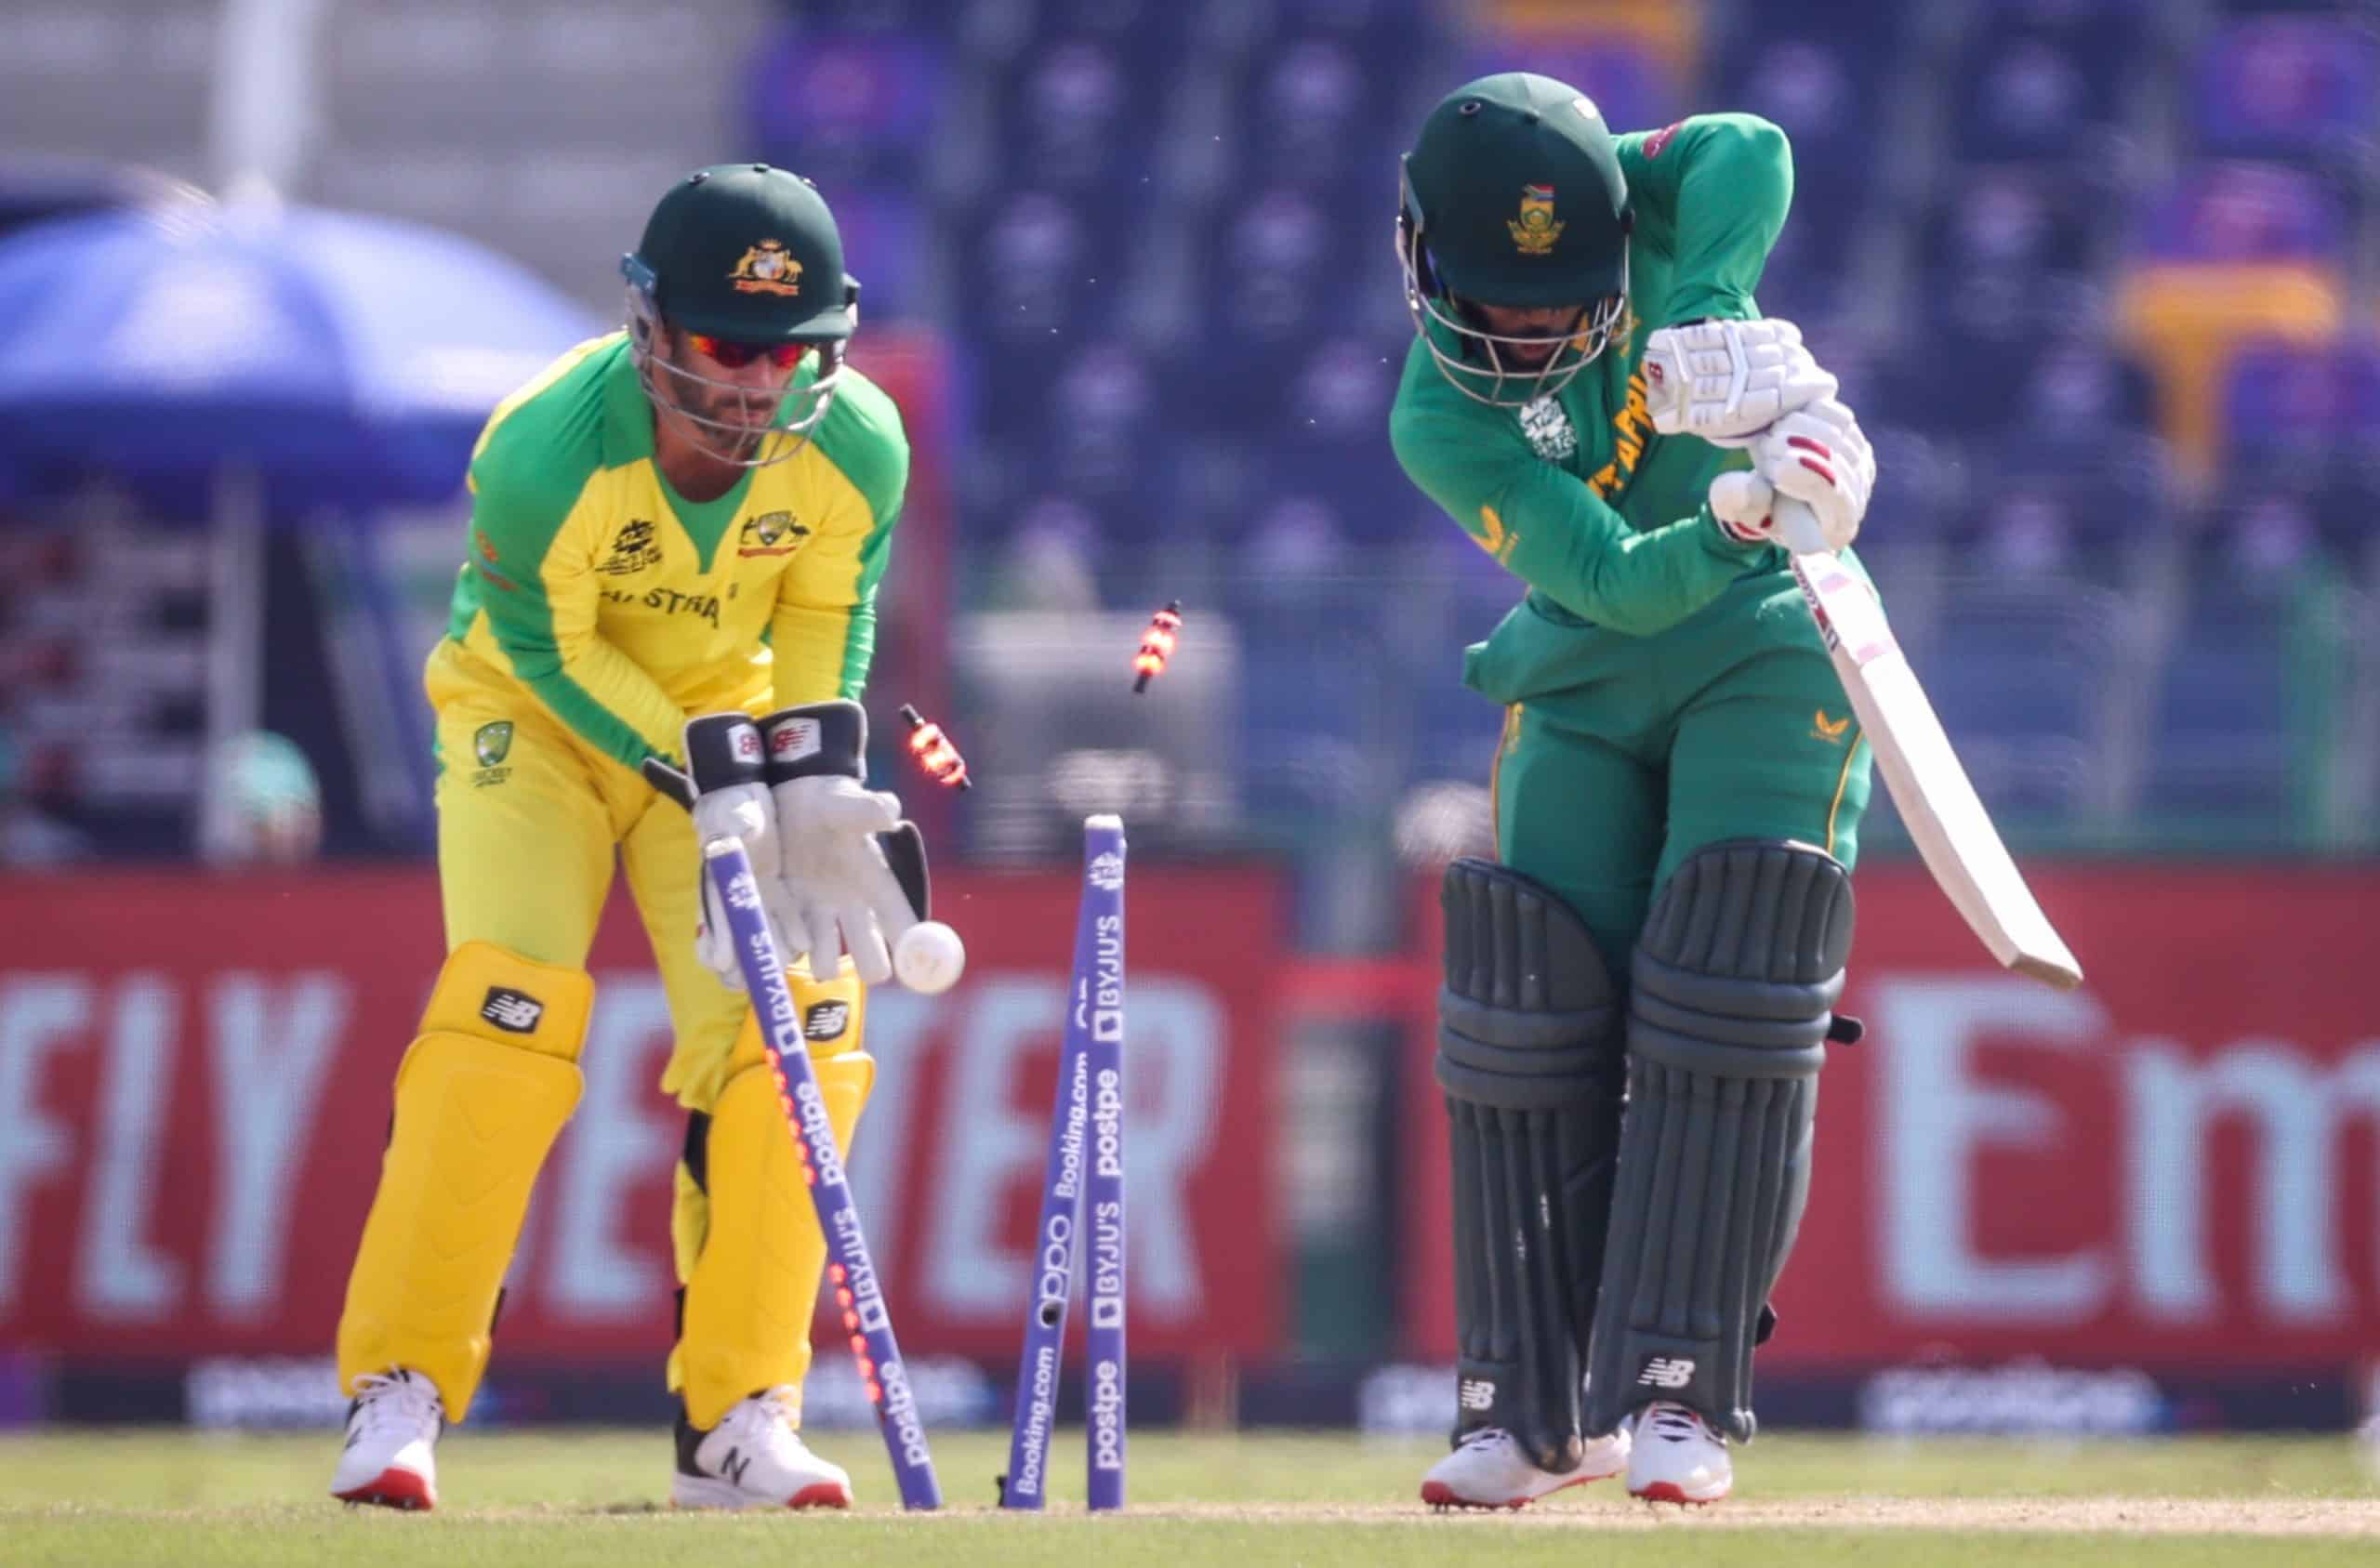 You are currently viewing Chronic batting failings continue to haunt toothless Proteas